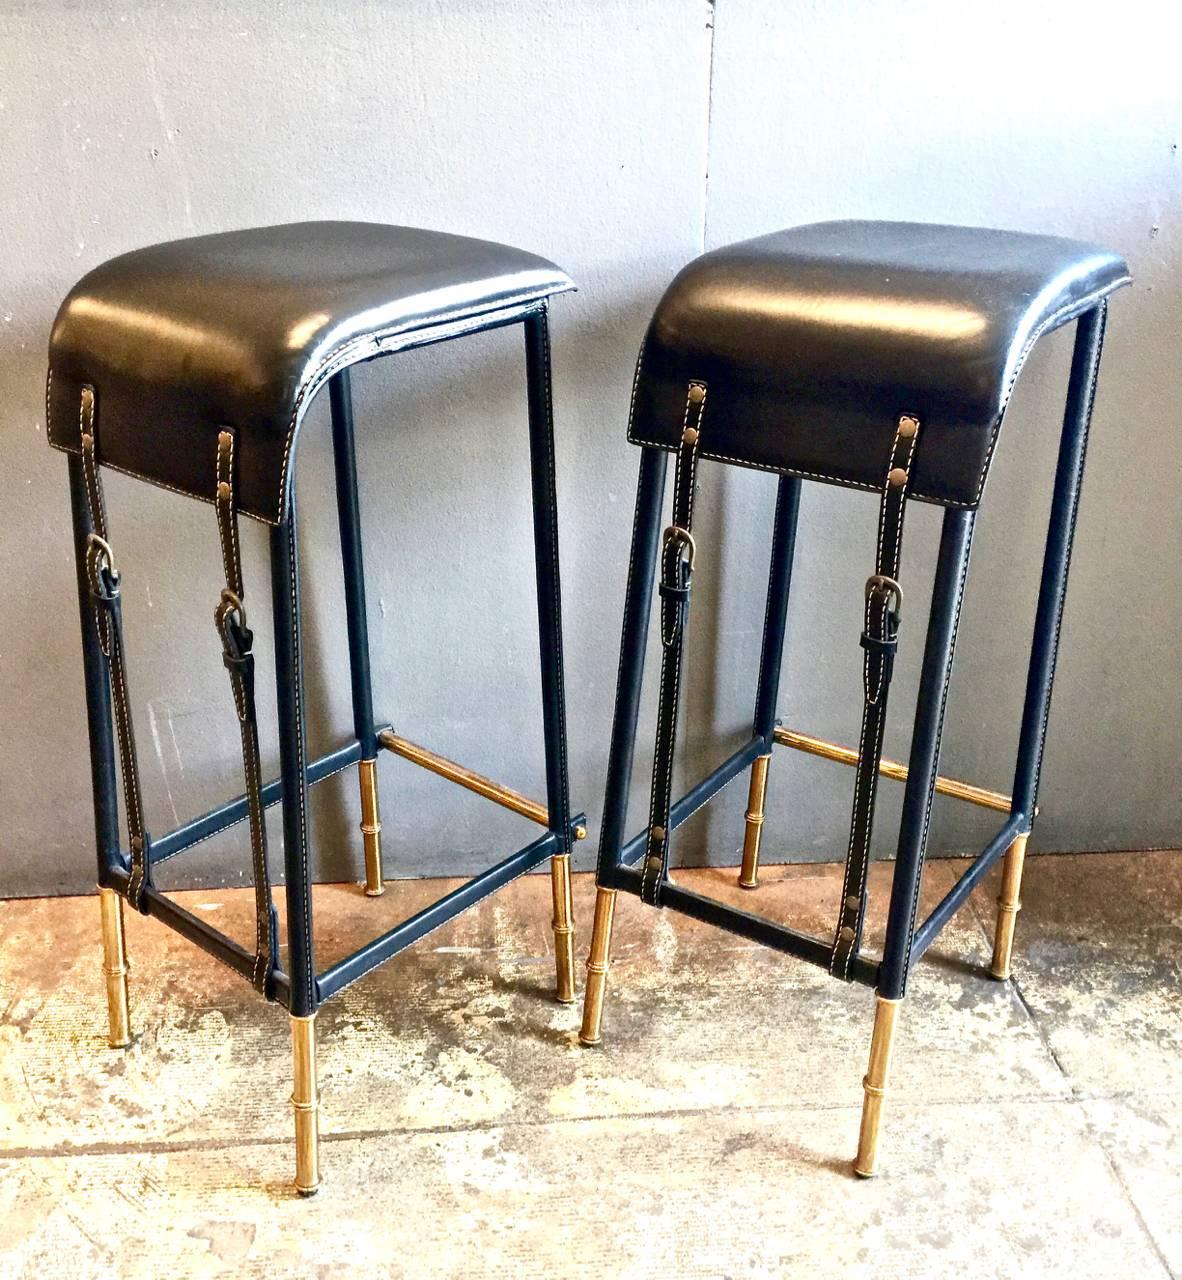 These amazing original Jacques Adnet Art Deco stools are show stoppers. They are 100% original, including the brass sabots. The original leather, strapping, stitching and brass detailing are in excellent condition. Two stools are available.